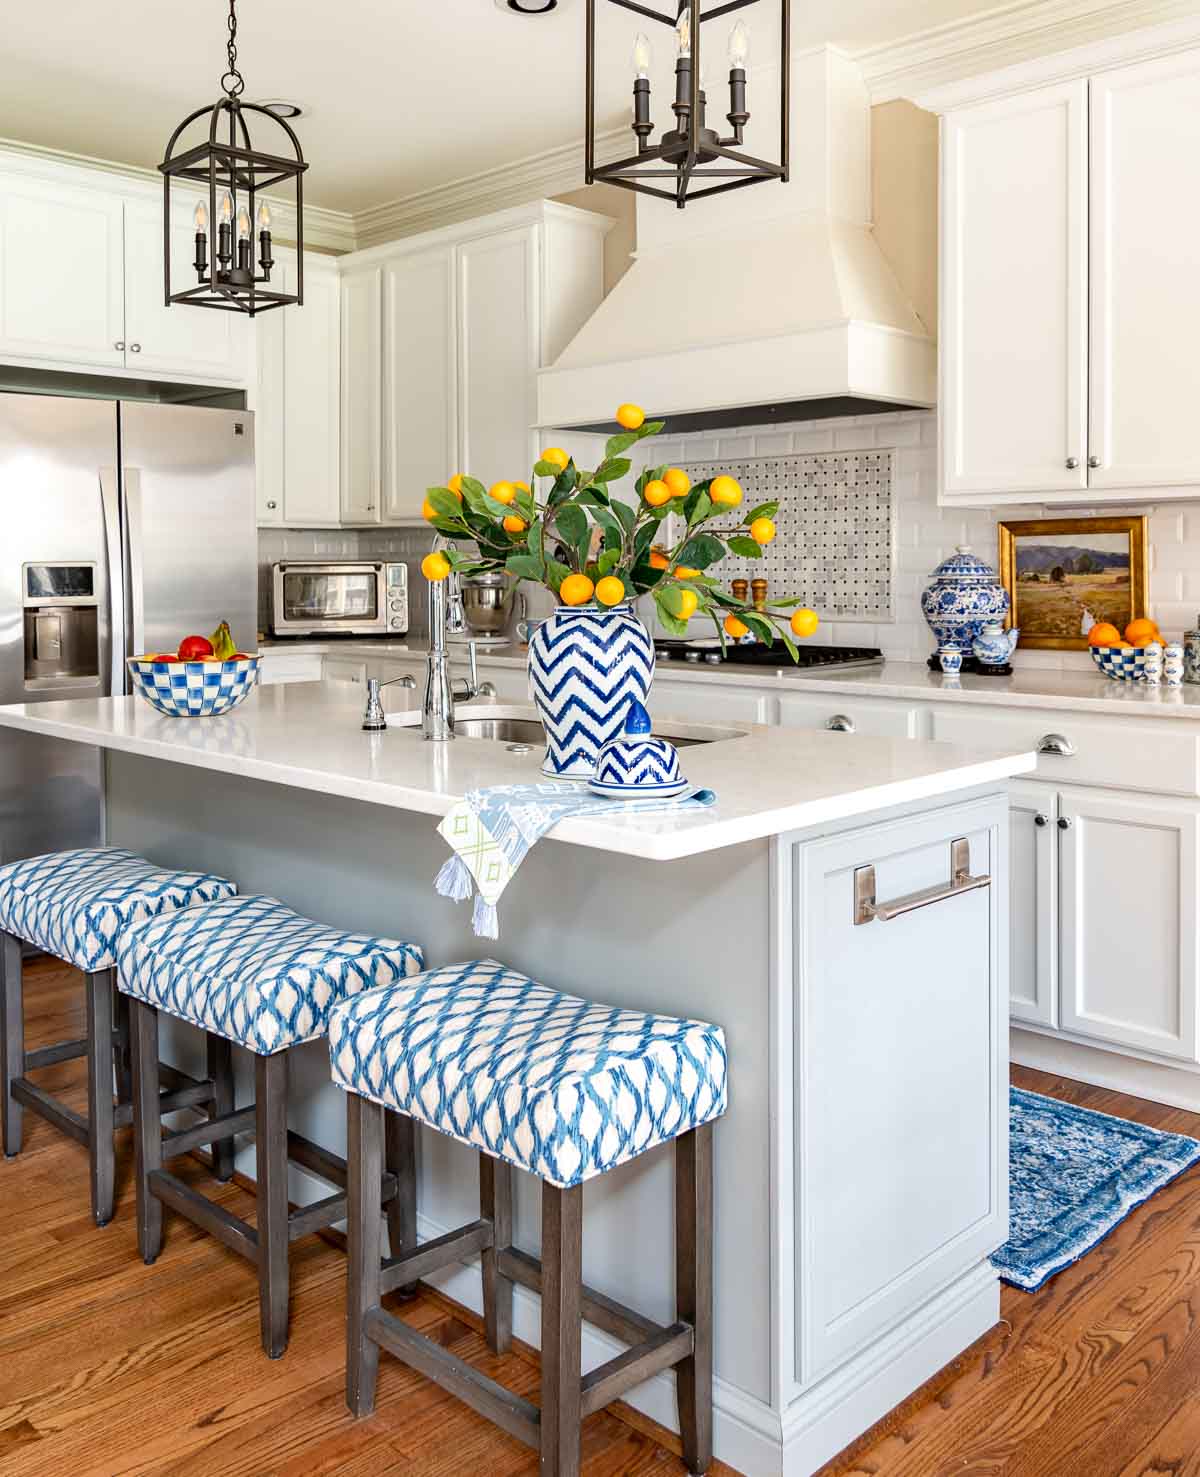 gray island in a kitchen with white cabinets. bar height stools upholstered in blue and white fabric. blue and white accents on the counters and a vase filled with faux orange stems on the island